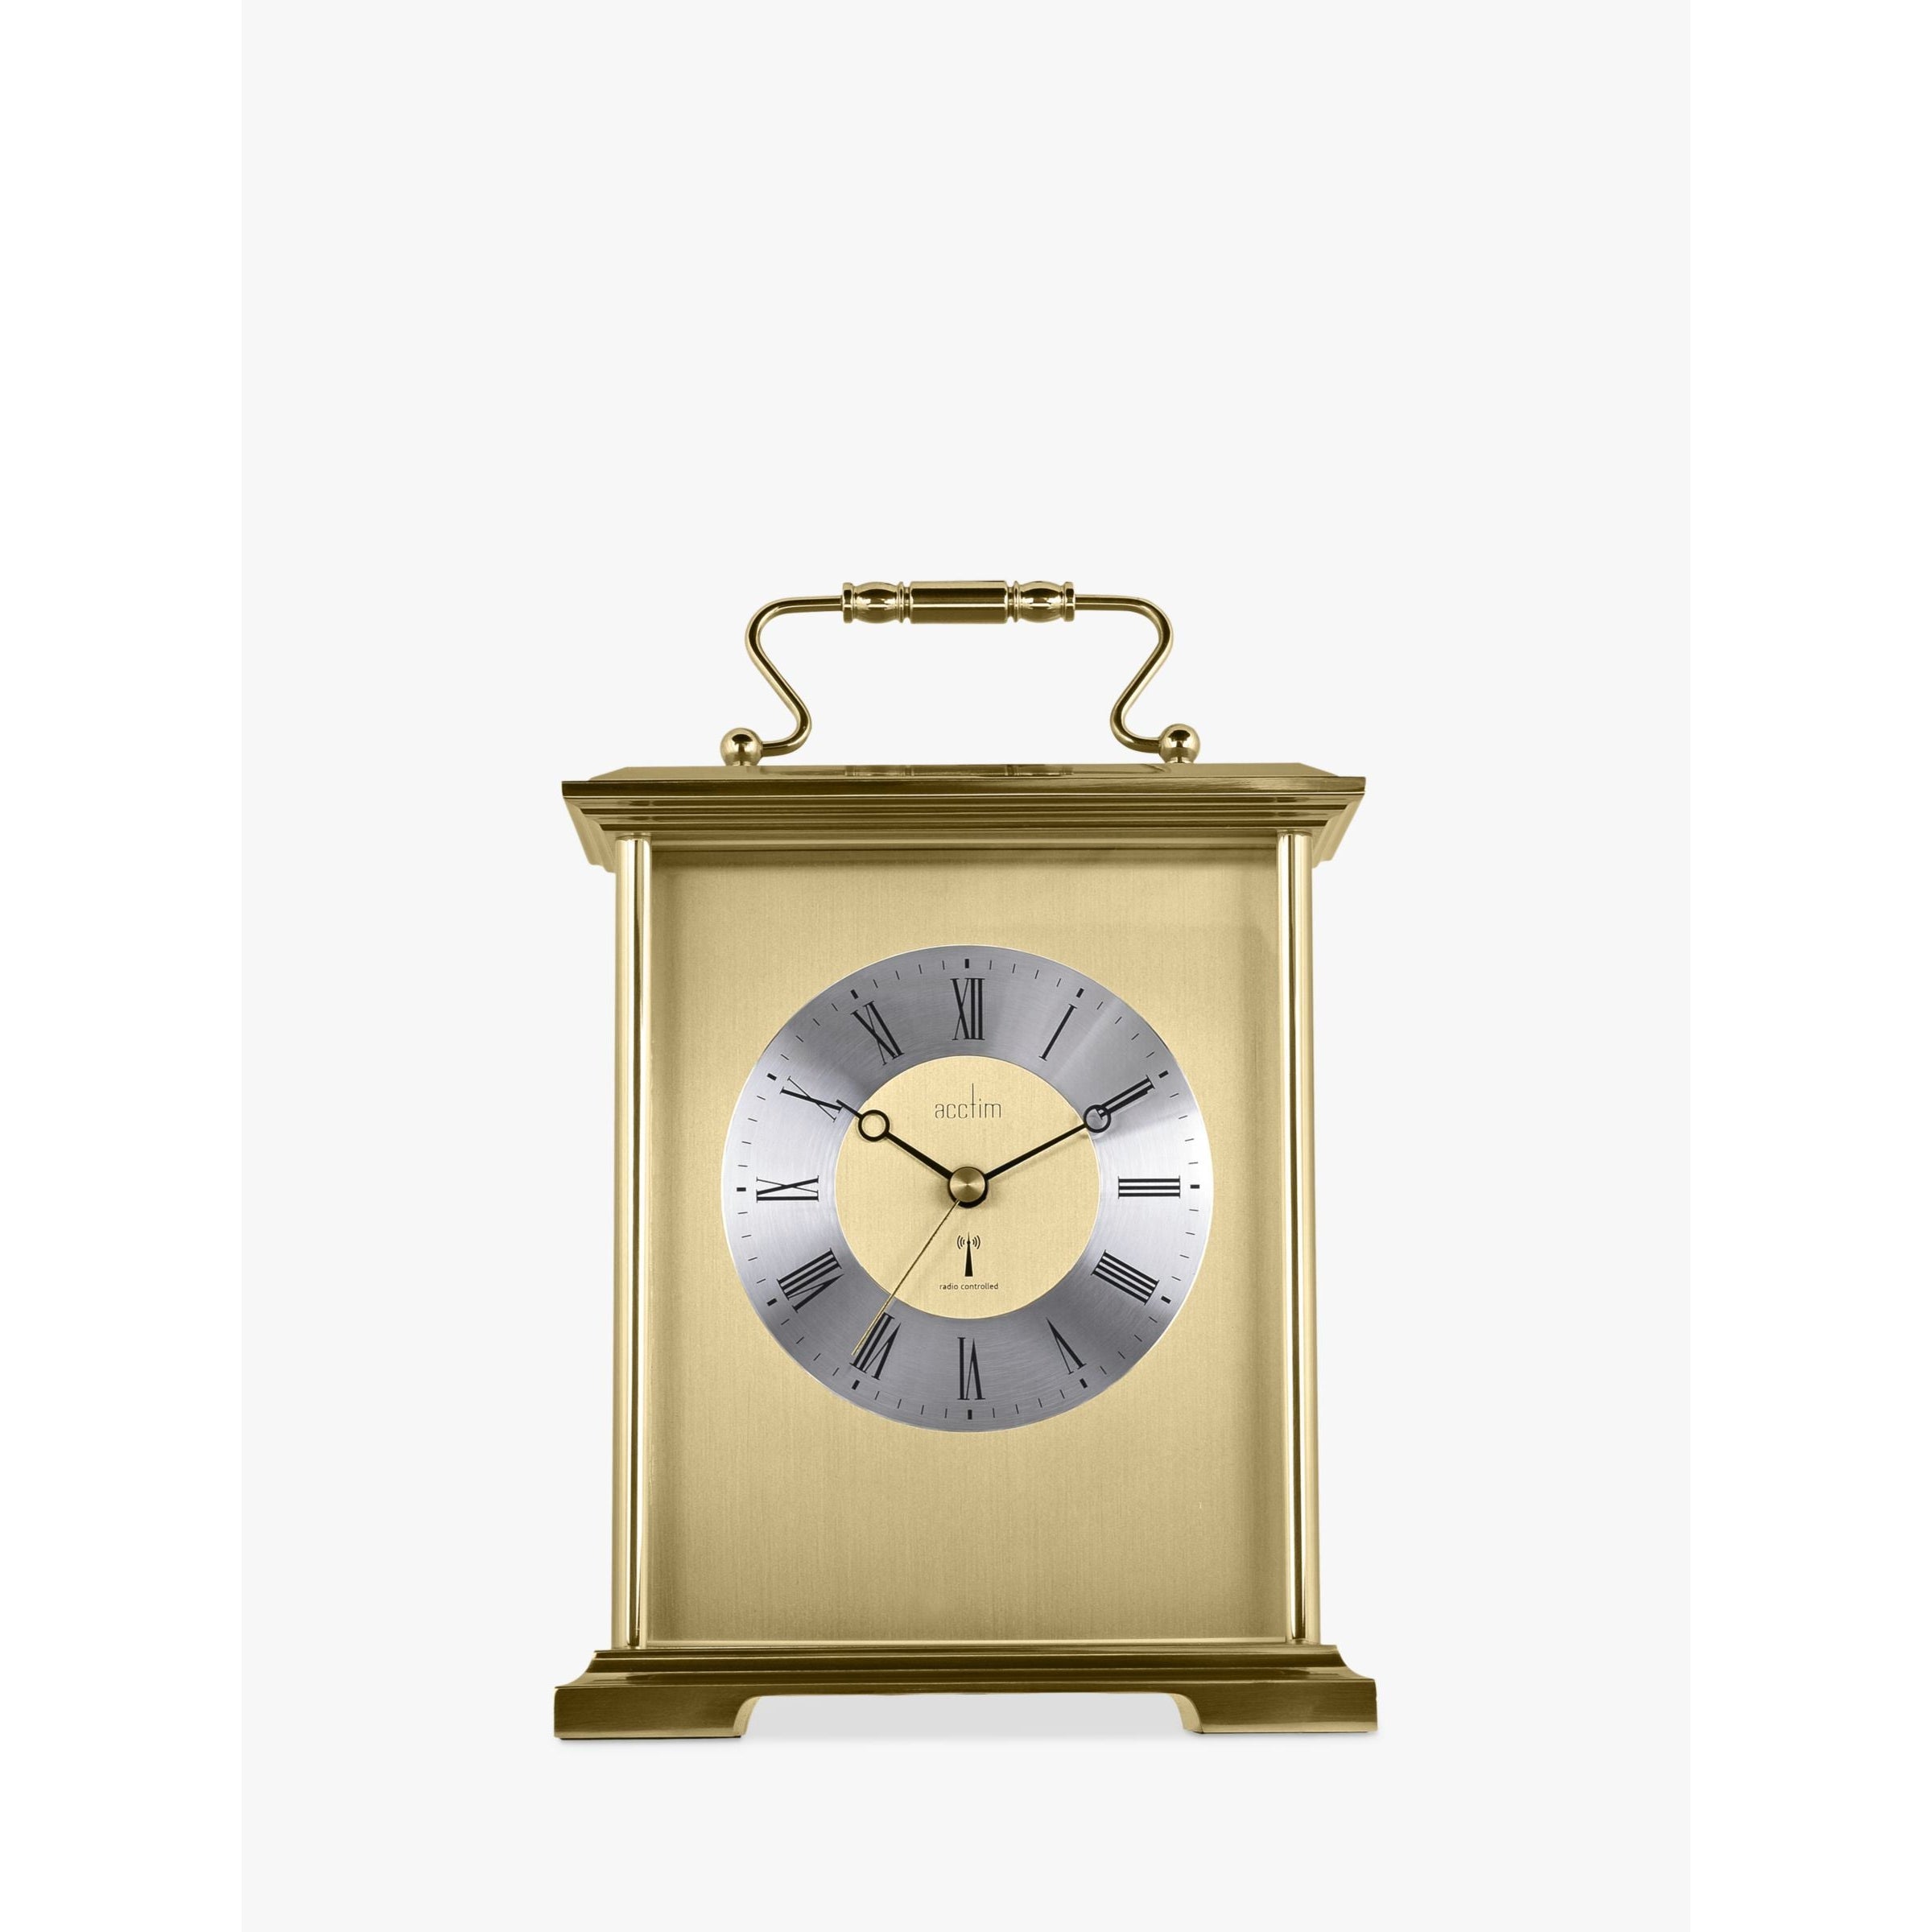 Acctim Radio Controlled Carriage Mantel Clock - Gold